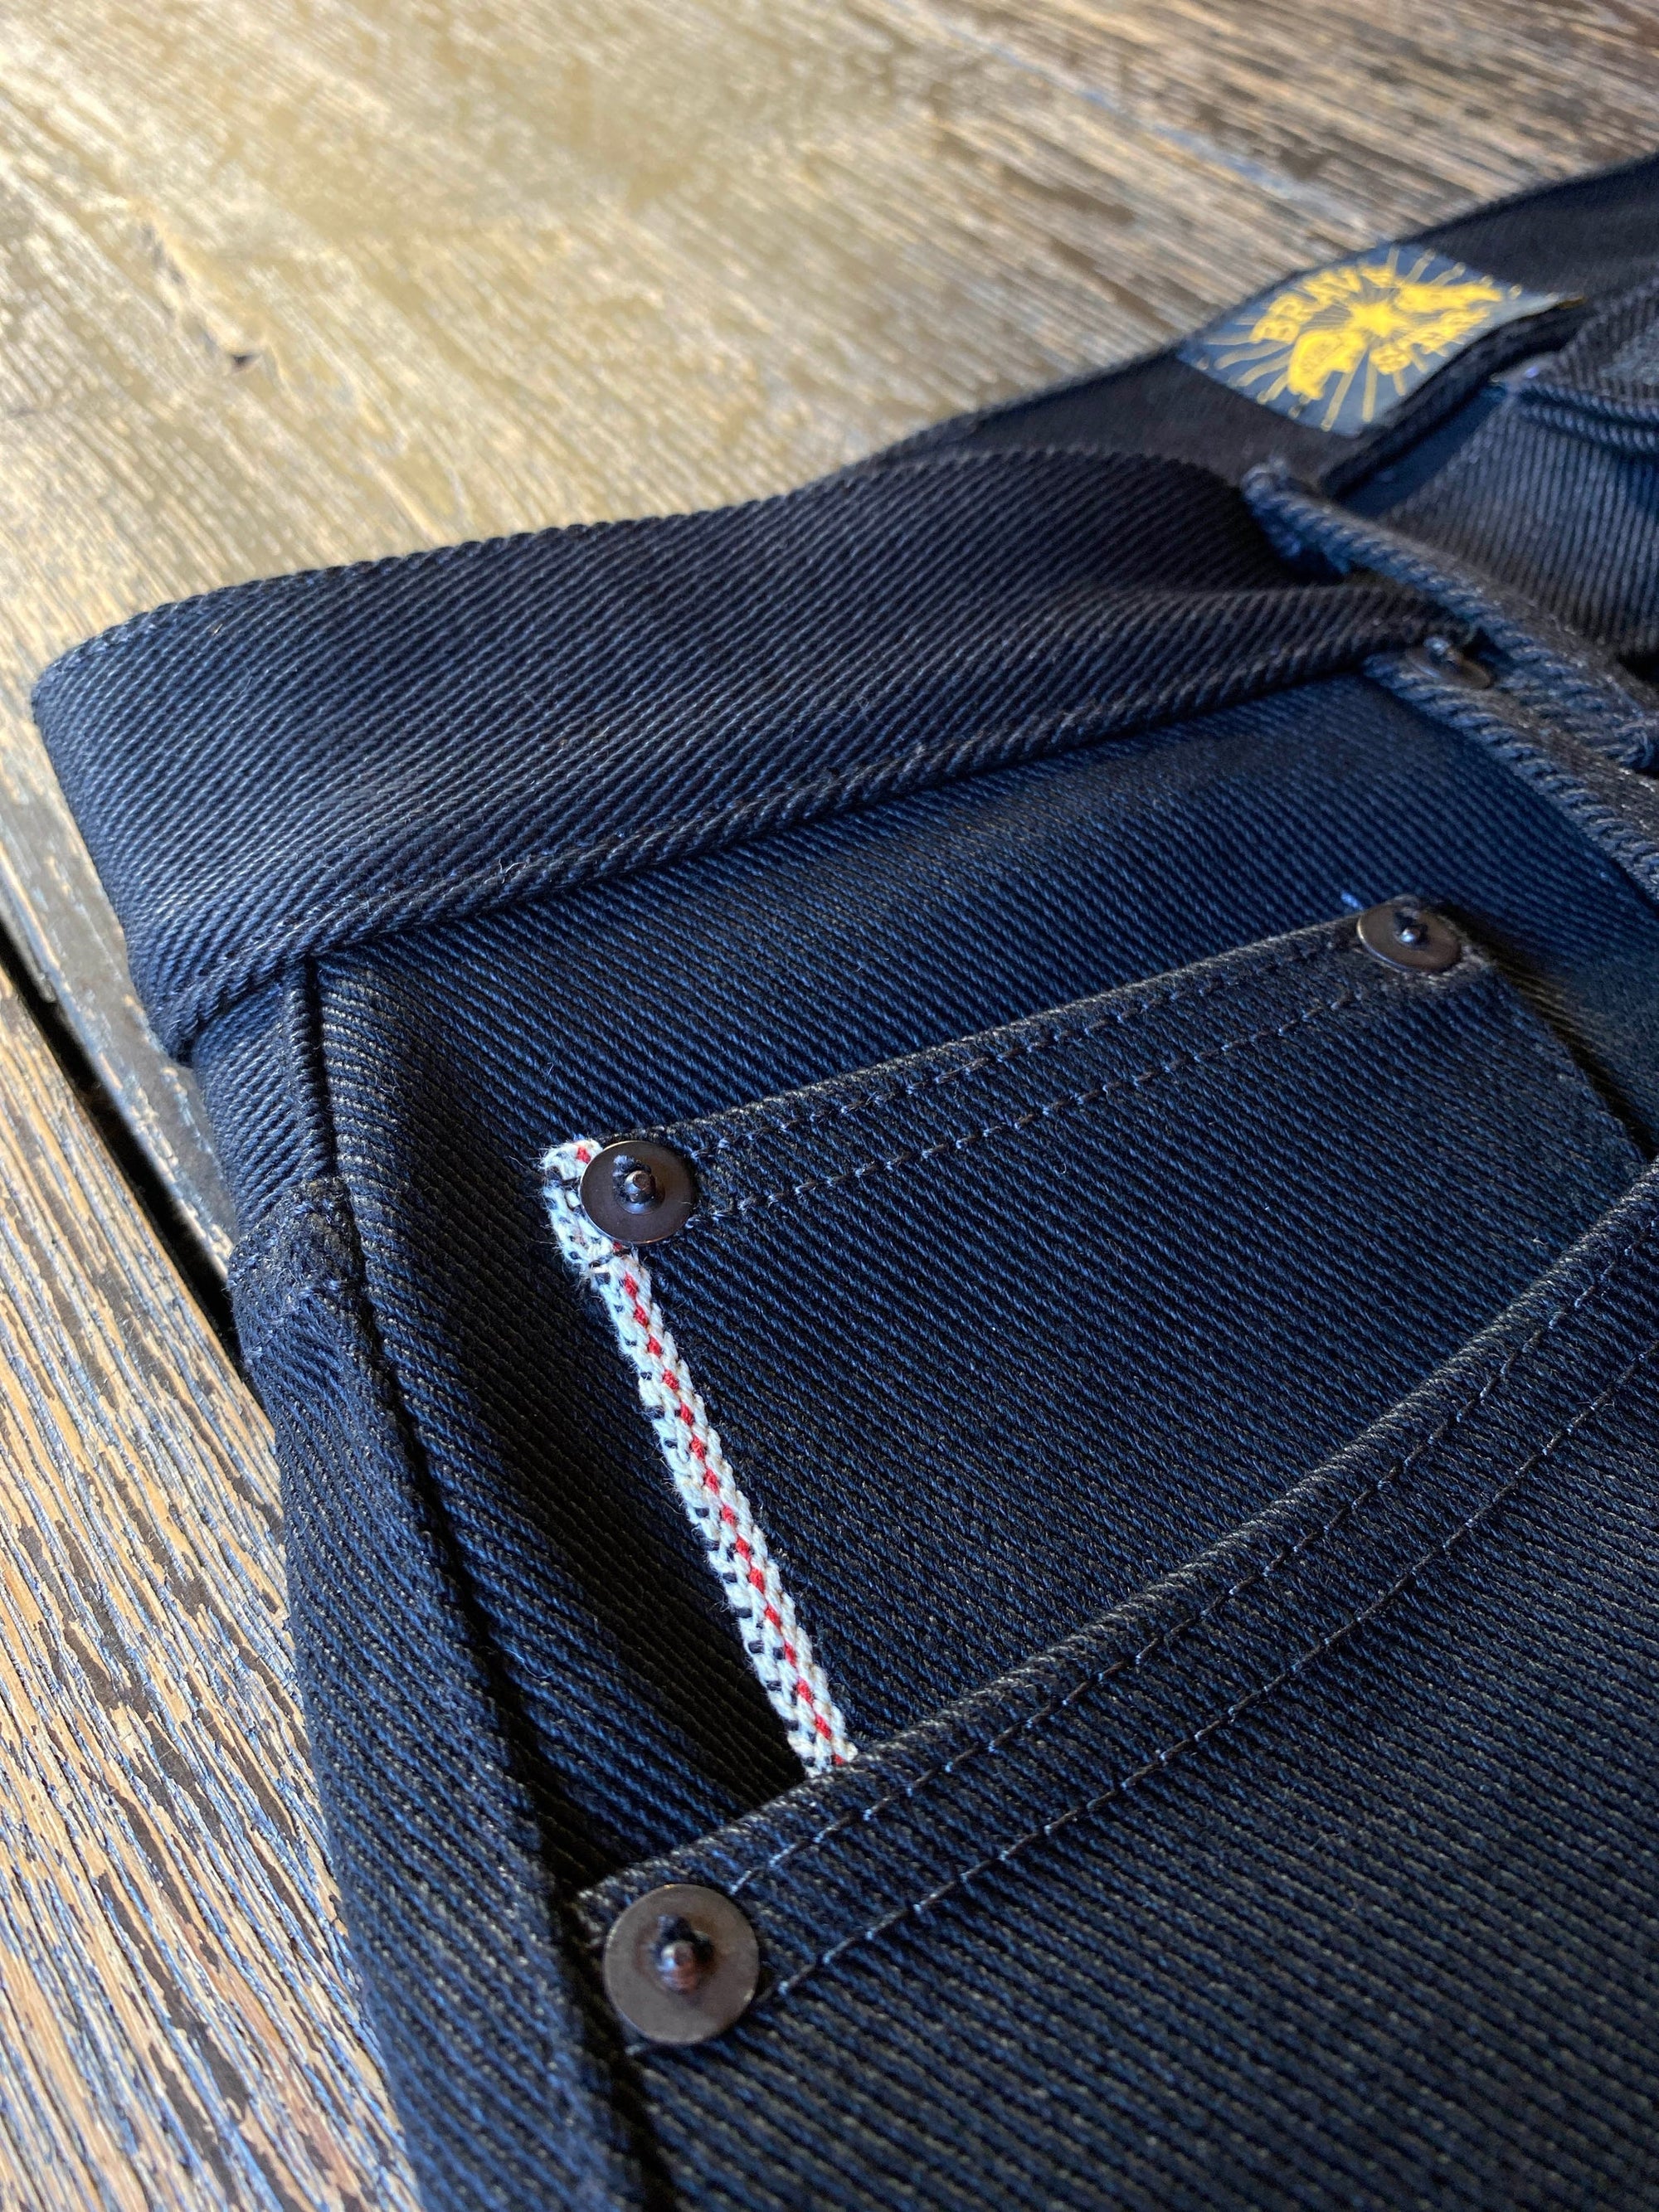 $68 Cone Mills Selvage - Brave Star Selvage